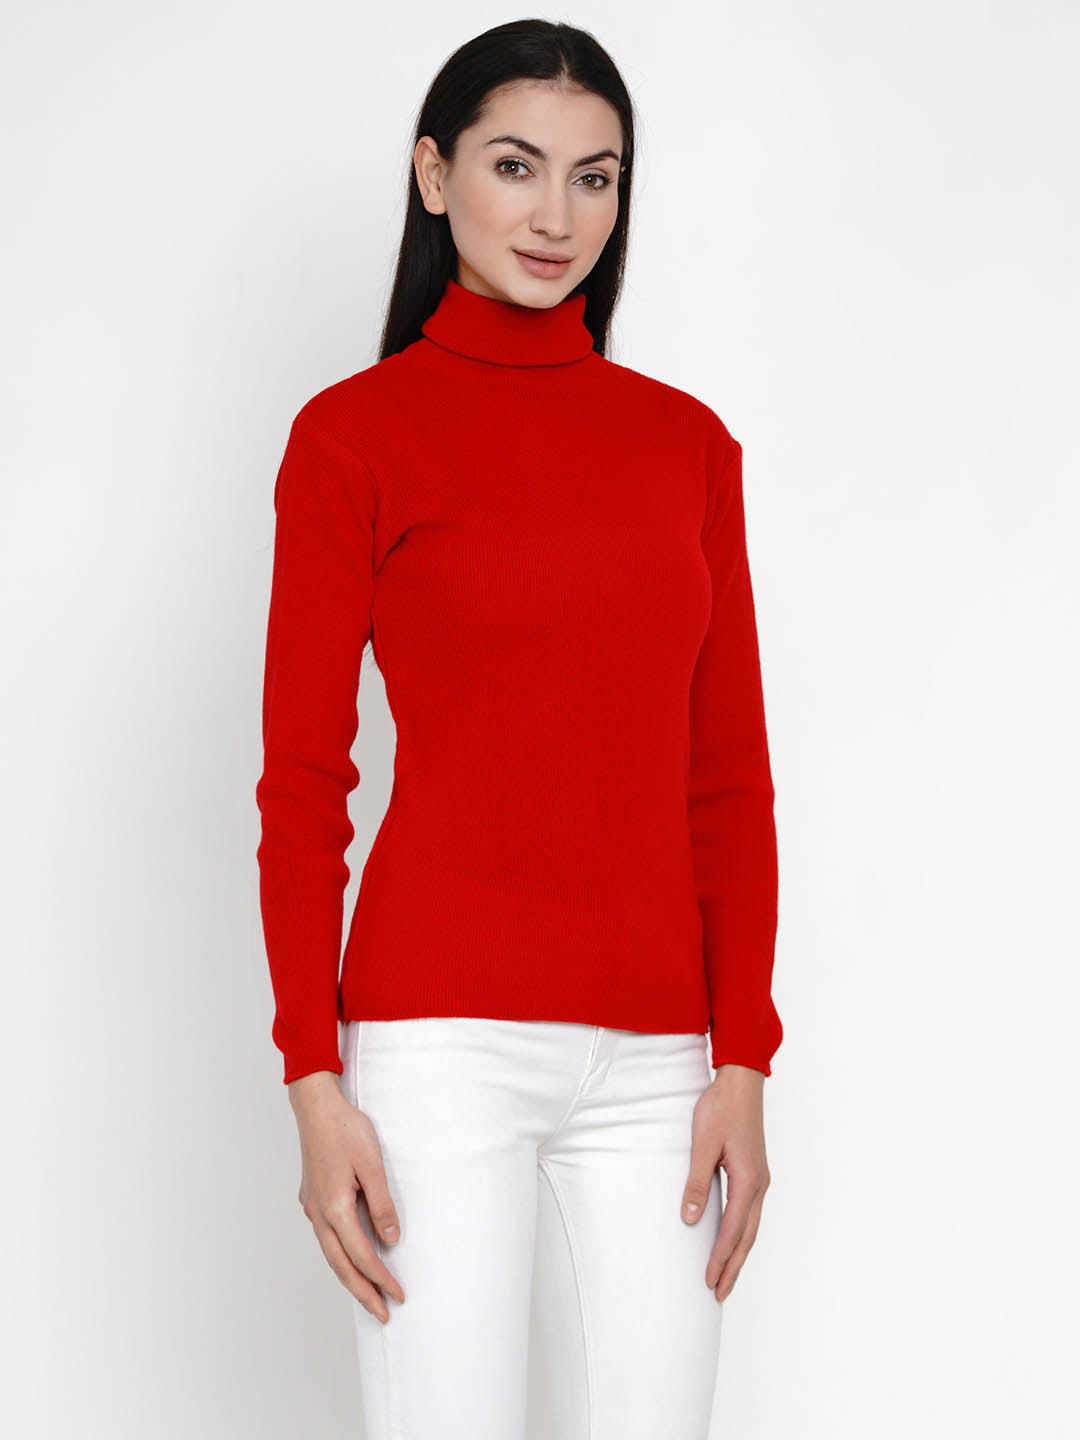 Red Winter Acrylic High Neck Sweater